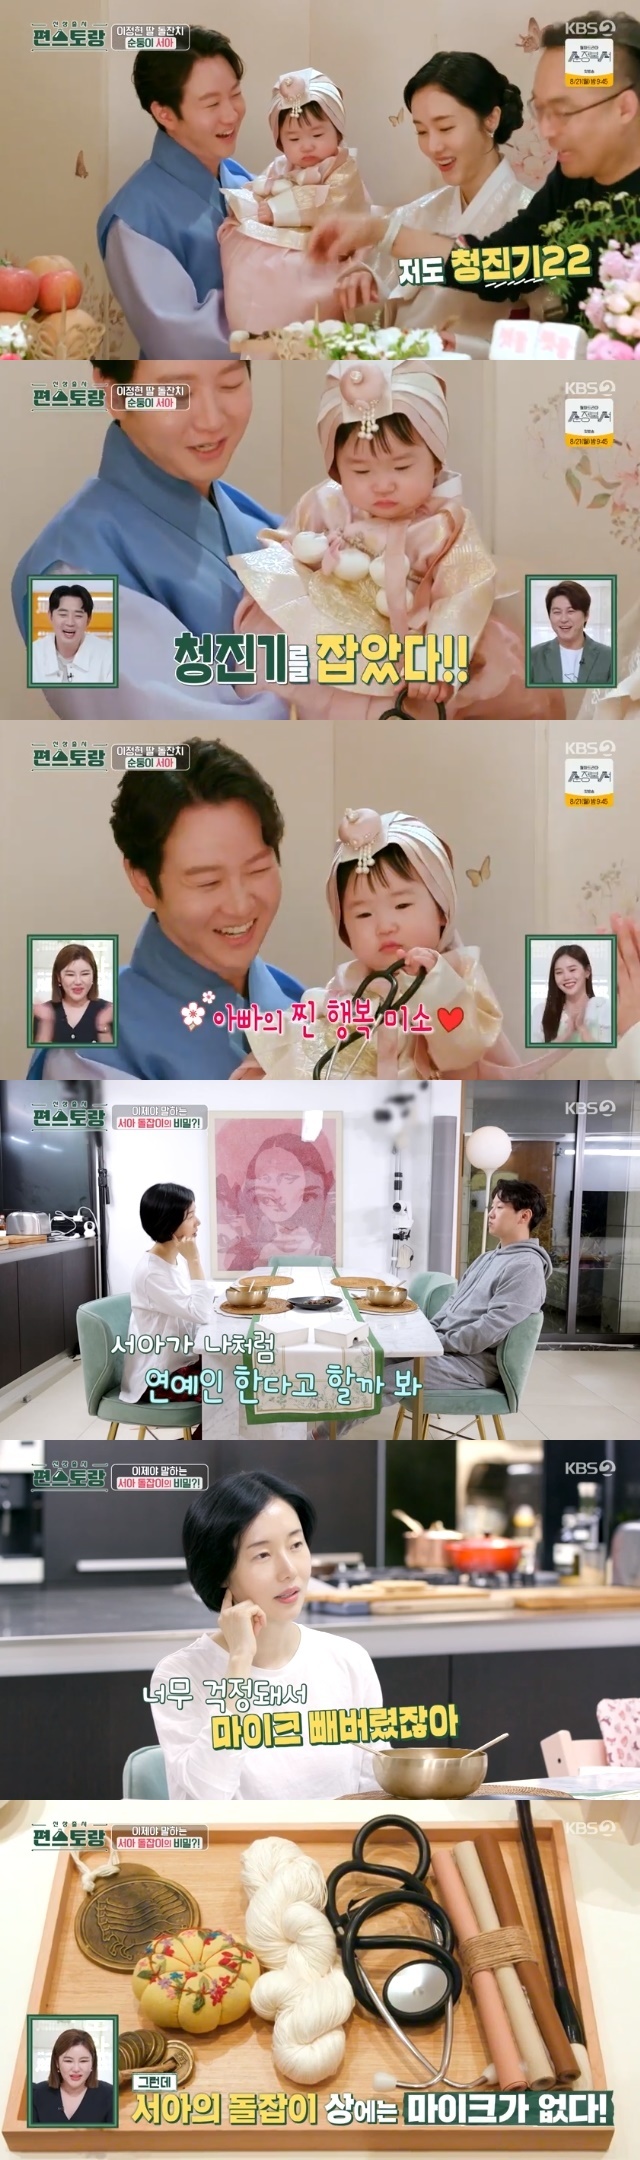 The daughters future job, desired by actor Lee Jung-hyun, was a doctor, not an entertainer.On August 11, KBS 2TV entertainment Stars Top Recipe at Fun-Staurant (hereinafter Stars Top Recipe at Fun-Staurant) 188 times, Lee Jung-hyuns daughter SeoAs Doljanchi site was revealed.SeoA, dressed in pretty clothes for Doljanchi, also took a photo shoot with Mother Lee Jung-hyun, Father park yu-jung, dressed up nicely.The photo shoot went smoothly thanks to SeoA, who showed off his Sungdongmi in a strange place even though he was wearing strange clothes.Lee Jung-hyun boasted, I have never cried at that time, when everyone was amazed at SeoA, who was tired and excited about one shake.Lee Jung-hyun has prepared SeoAs baby food lunch box until Doljanchi day. No matter how busy, SeoAs rice is made by hand.SeoA, who has taken care of Lee Jung-hyuns table baby food, has been rhythmically singing the birthday song that people call afterwards, revealing the mothers resemblance.Zhuazhou, the highlight of Doljanchi, went ahead.SeoAs Zhuazhou, which Lee Jung-hyun and park yu-jung wanted, was a Stethoscope, with maple, money, needle wrap, silk thread, Stethoscope,And in response to this wind, SeoA grabbed the Stethoscope and made Mother and Father show a steamed happy smile.Lee Jung-hyun was delighted to answer Yes to the admiration that three generations to grandfather, father, and SeoA are doctors family if Zhuazhou is the only way.After returning home from Doljanchi, Lee Jung-hyun put his troubled daughter to bed.Park yu-jung, who was seated at the visual table, suddenly entered the kitchen while watching the old Stars Top Recipe at Fun-Staurant video starring Lee Jung-hyun.Lee Jung-hyuns past Stars Top Recipe at Fun-Staurant for Lee Jung-hyun, who suffered more than usual, challenged Cuisine. It was a surprise event of park yu-jung.The meticulous and delicate nature of the park yu-jung did more than I thought. Cuisines process was easier because of Lee Jung-hyuns universal soy sauce.Lee Jung-hyun, who tasted the finished Cuisine, spit it on the unripe meat.In the end, Lee Jung-hyun cooked more sesame leaf meat with his own hands and made additional cold noodles.In particular, the park yu-jung said, SeoA has caught the Stethoscope. Seeing SeoA growing up now seems to have both temperaments.Lee Jung-hyun recalled that he had followed Michael Jackson and Madonnas dance from the beginning of his toddler.However, Lee Jung-hyun objected to his daughter becoming an entertainer. Lee Jung-hyun said, In fact, SeoA was so worried about going to the same entertainer (with me) when Zhuazhou, he said.It was too hard for me to be active since I was 15 years old. I also want to be a good entertainer, but if not, it will be too hard.Lee Jung-hyun asked her husband what SeoA would do if she said she was an entertainer. I will tell you all the hard things I have experienced since I was a child.If you can hold on to this, Mother will say that she will support you once. 